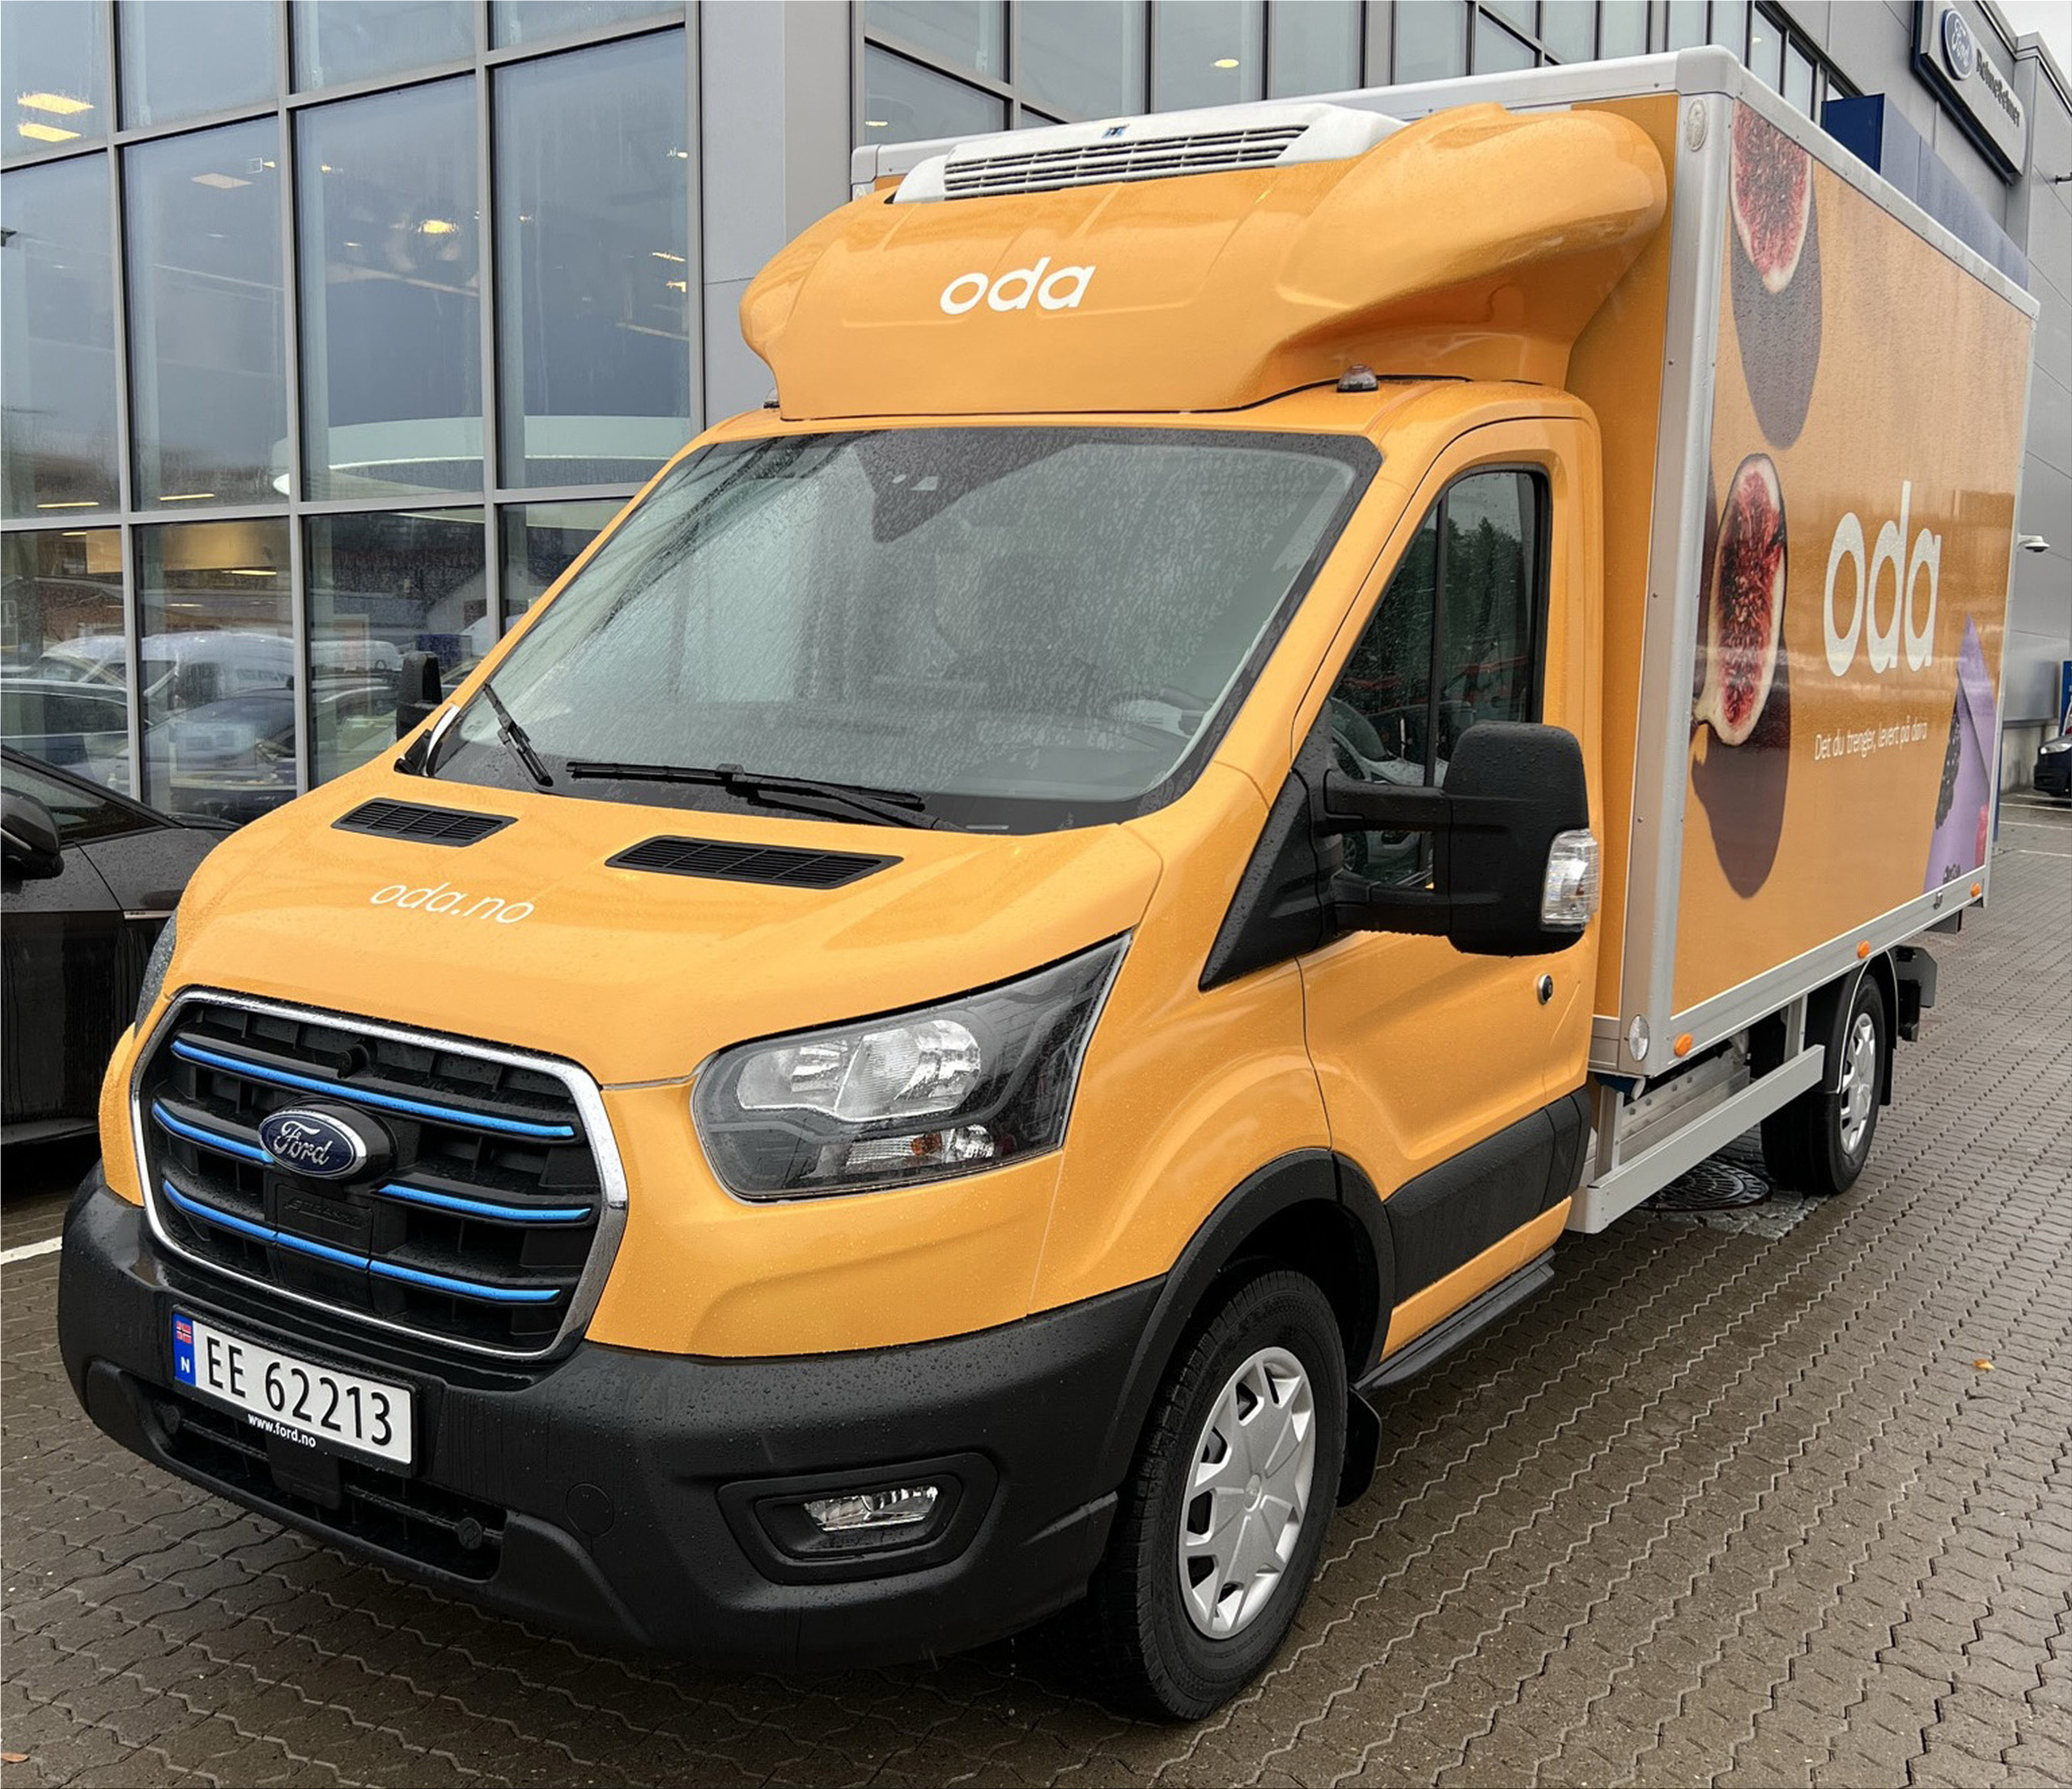 Ford Pro Reveals Exciting Next Phase of Electrification Journey with  All-New, All-Electric E-Transit Custom, Ford of Europe